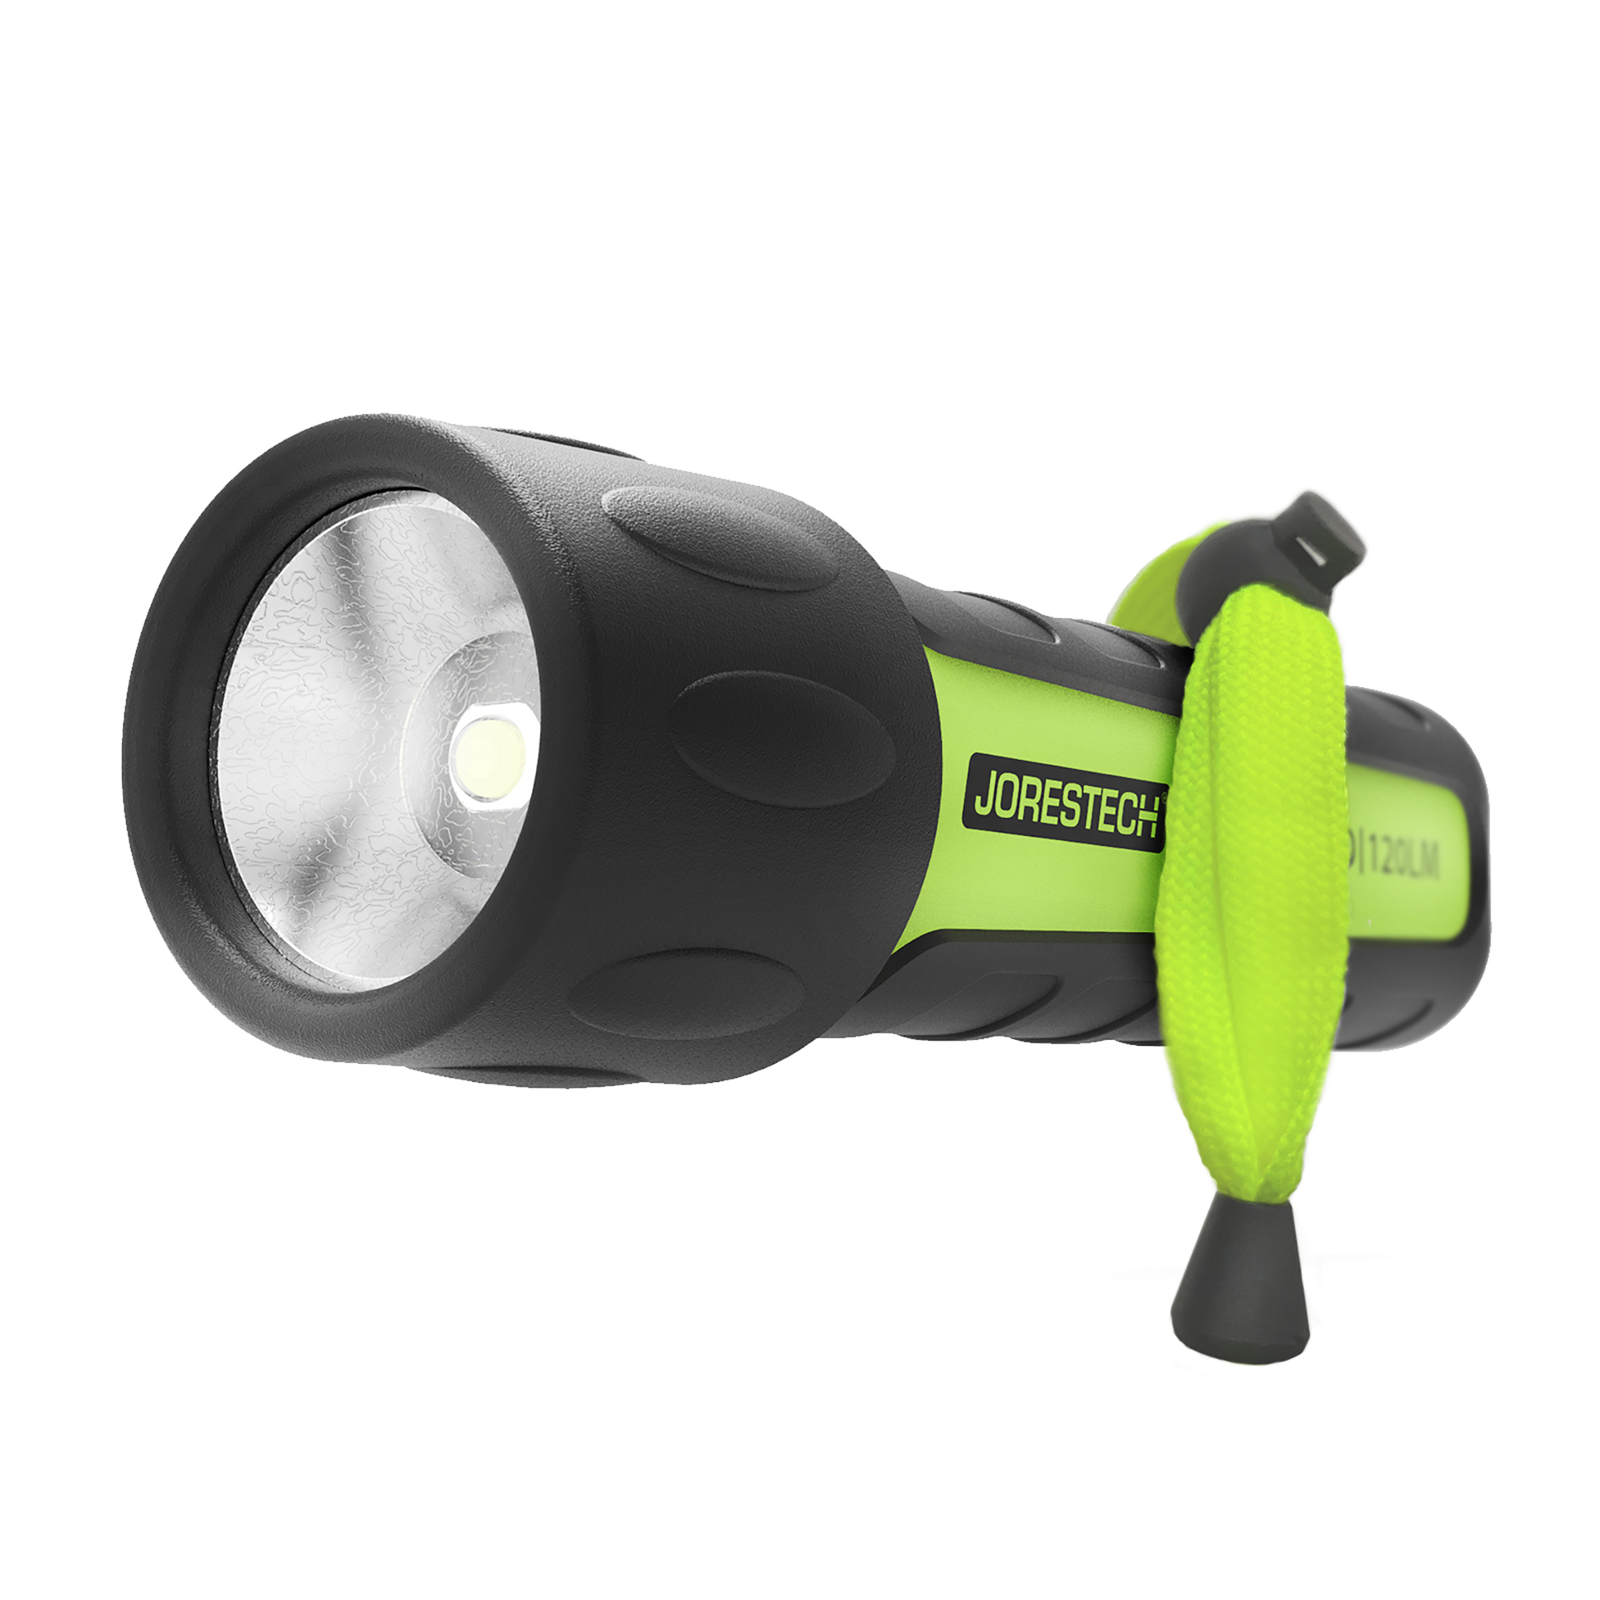 The ultra light bright weatherproof black and lime flashlight with hand strap.